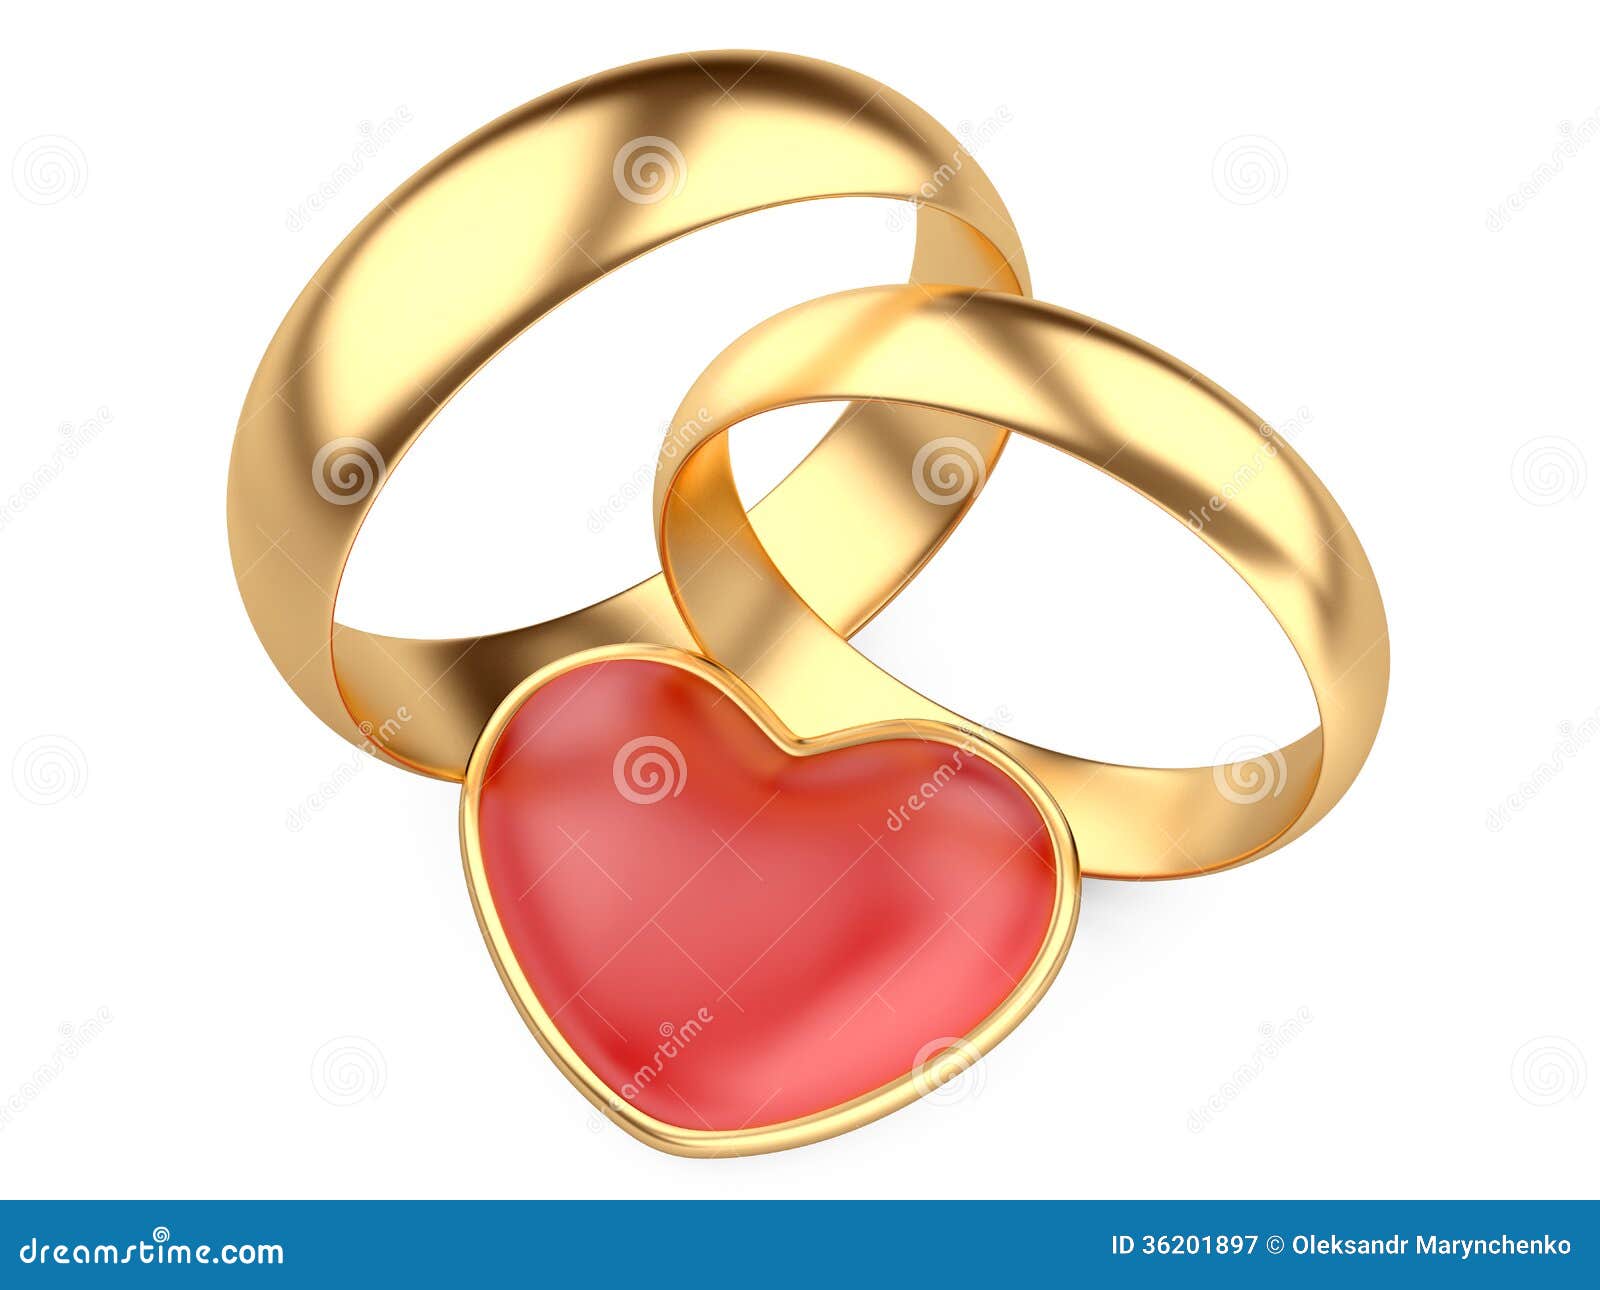 Gold Wedding Rings And Red Heart Royalty Free Stock ...